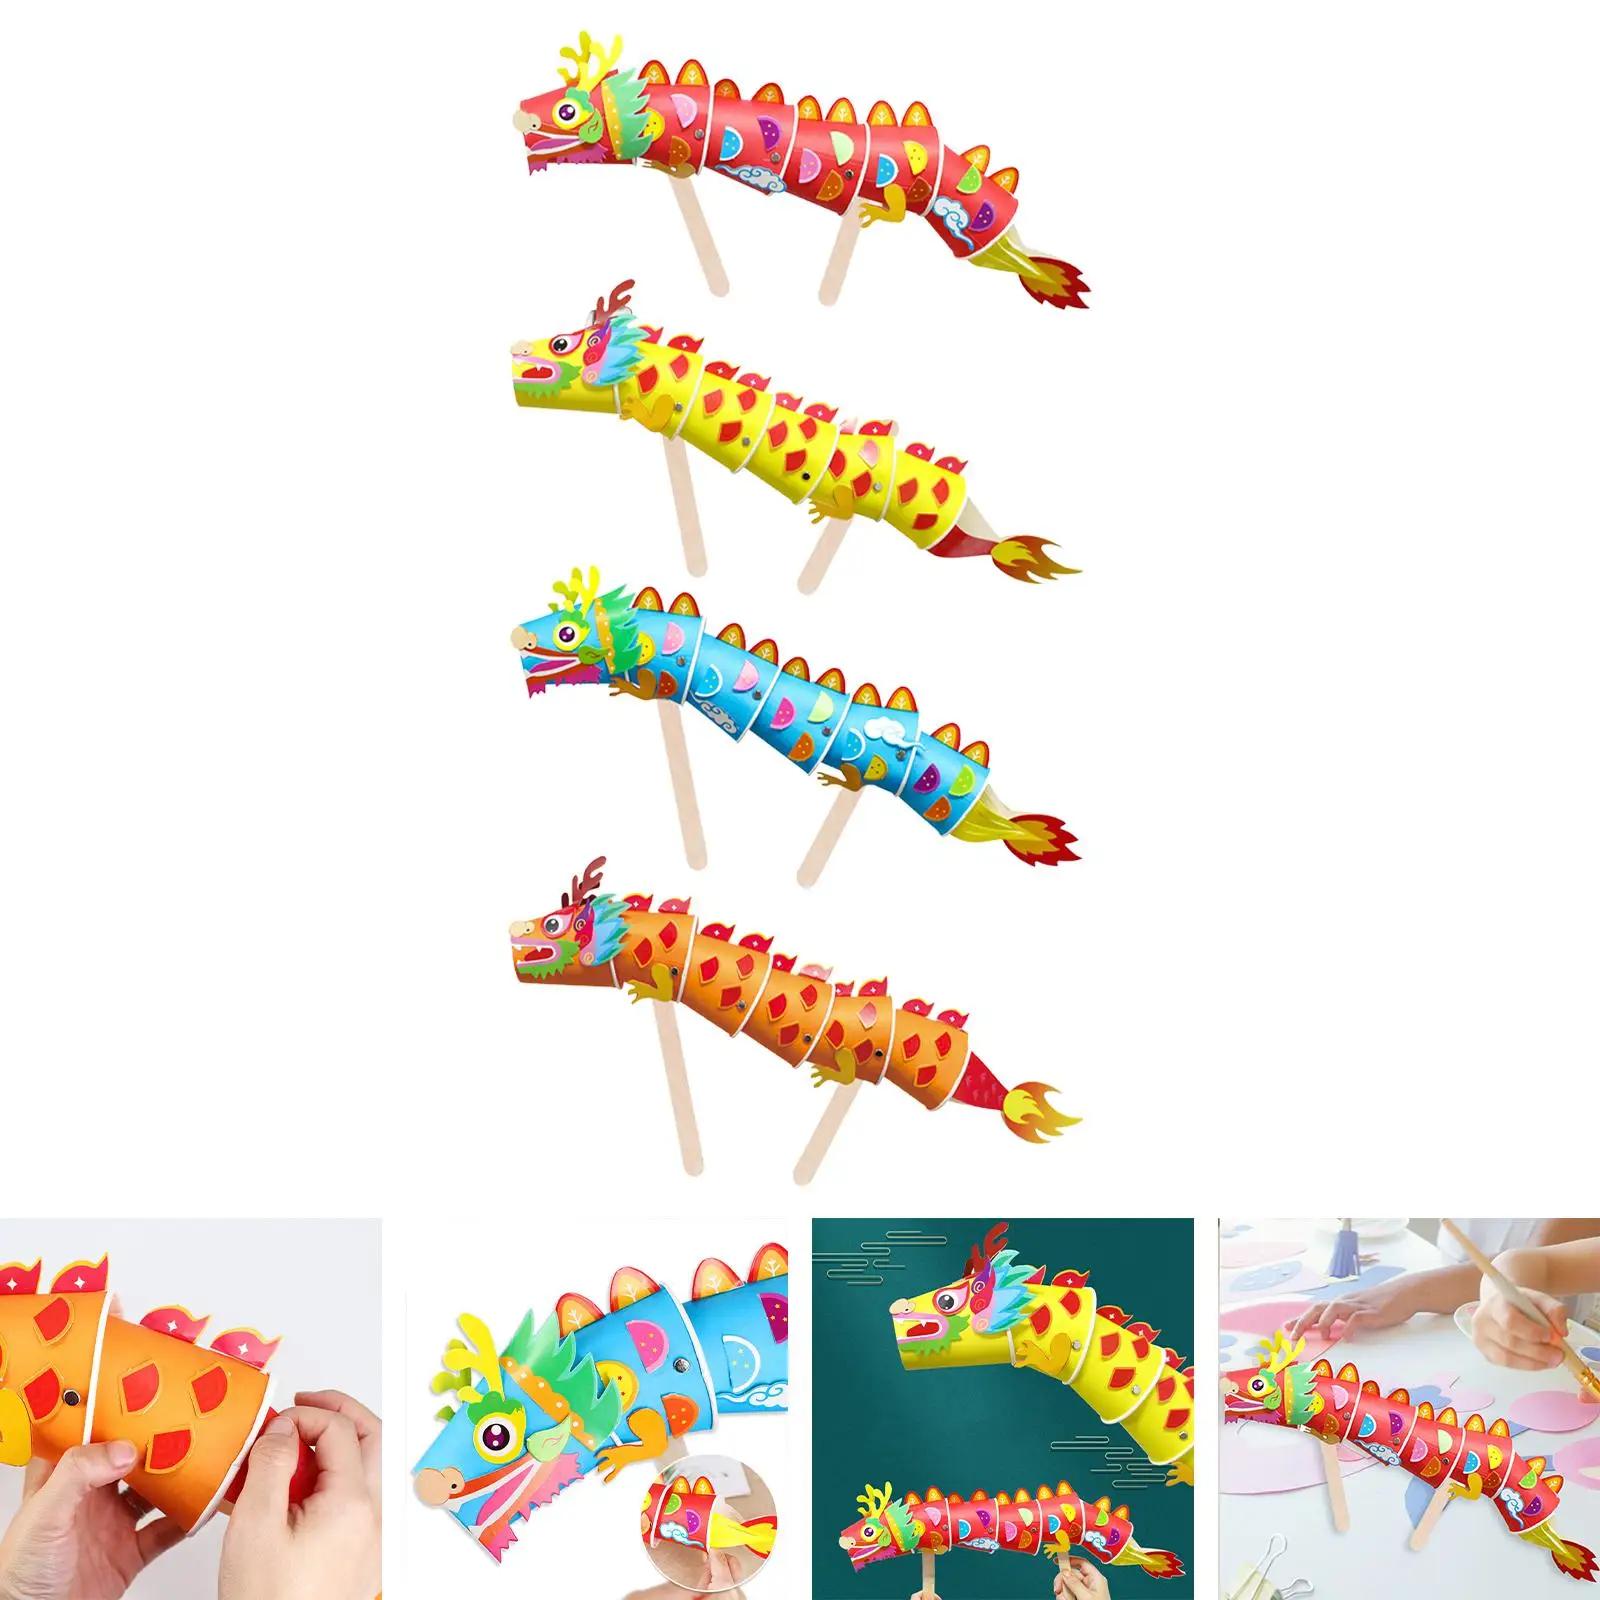 Dragon Paper Cup Handcraft Festival Chinese Paper Dragon Decoration Handwork 3D DIY Paper Cups for Warm up Interaction